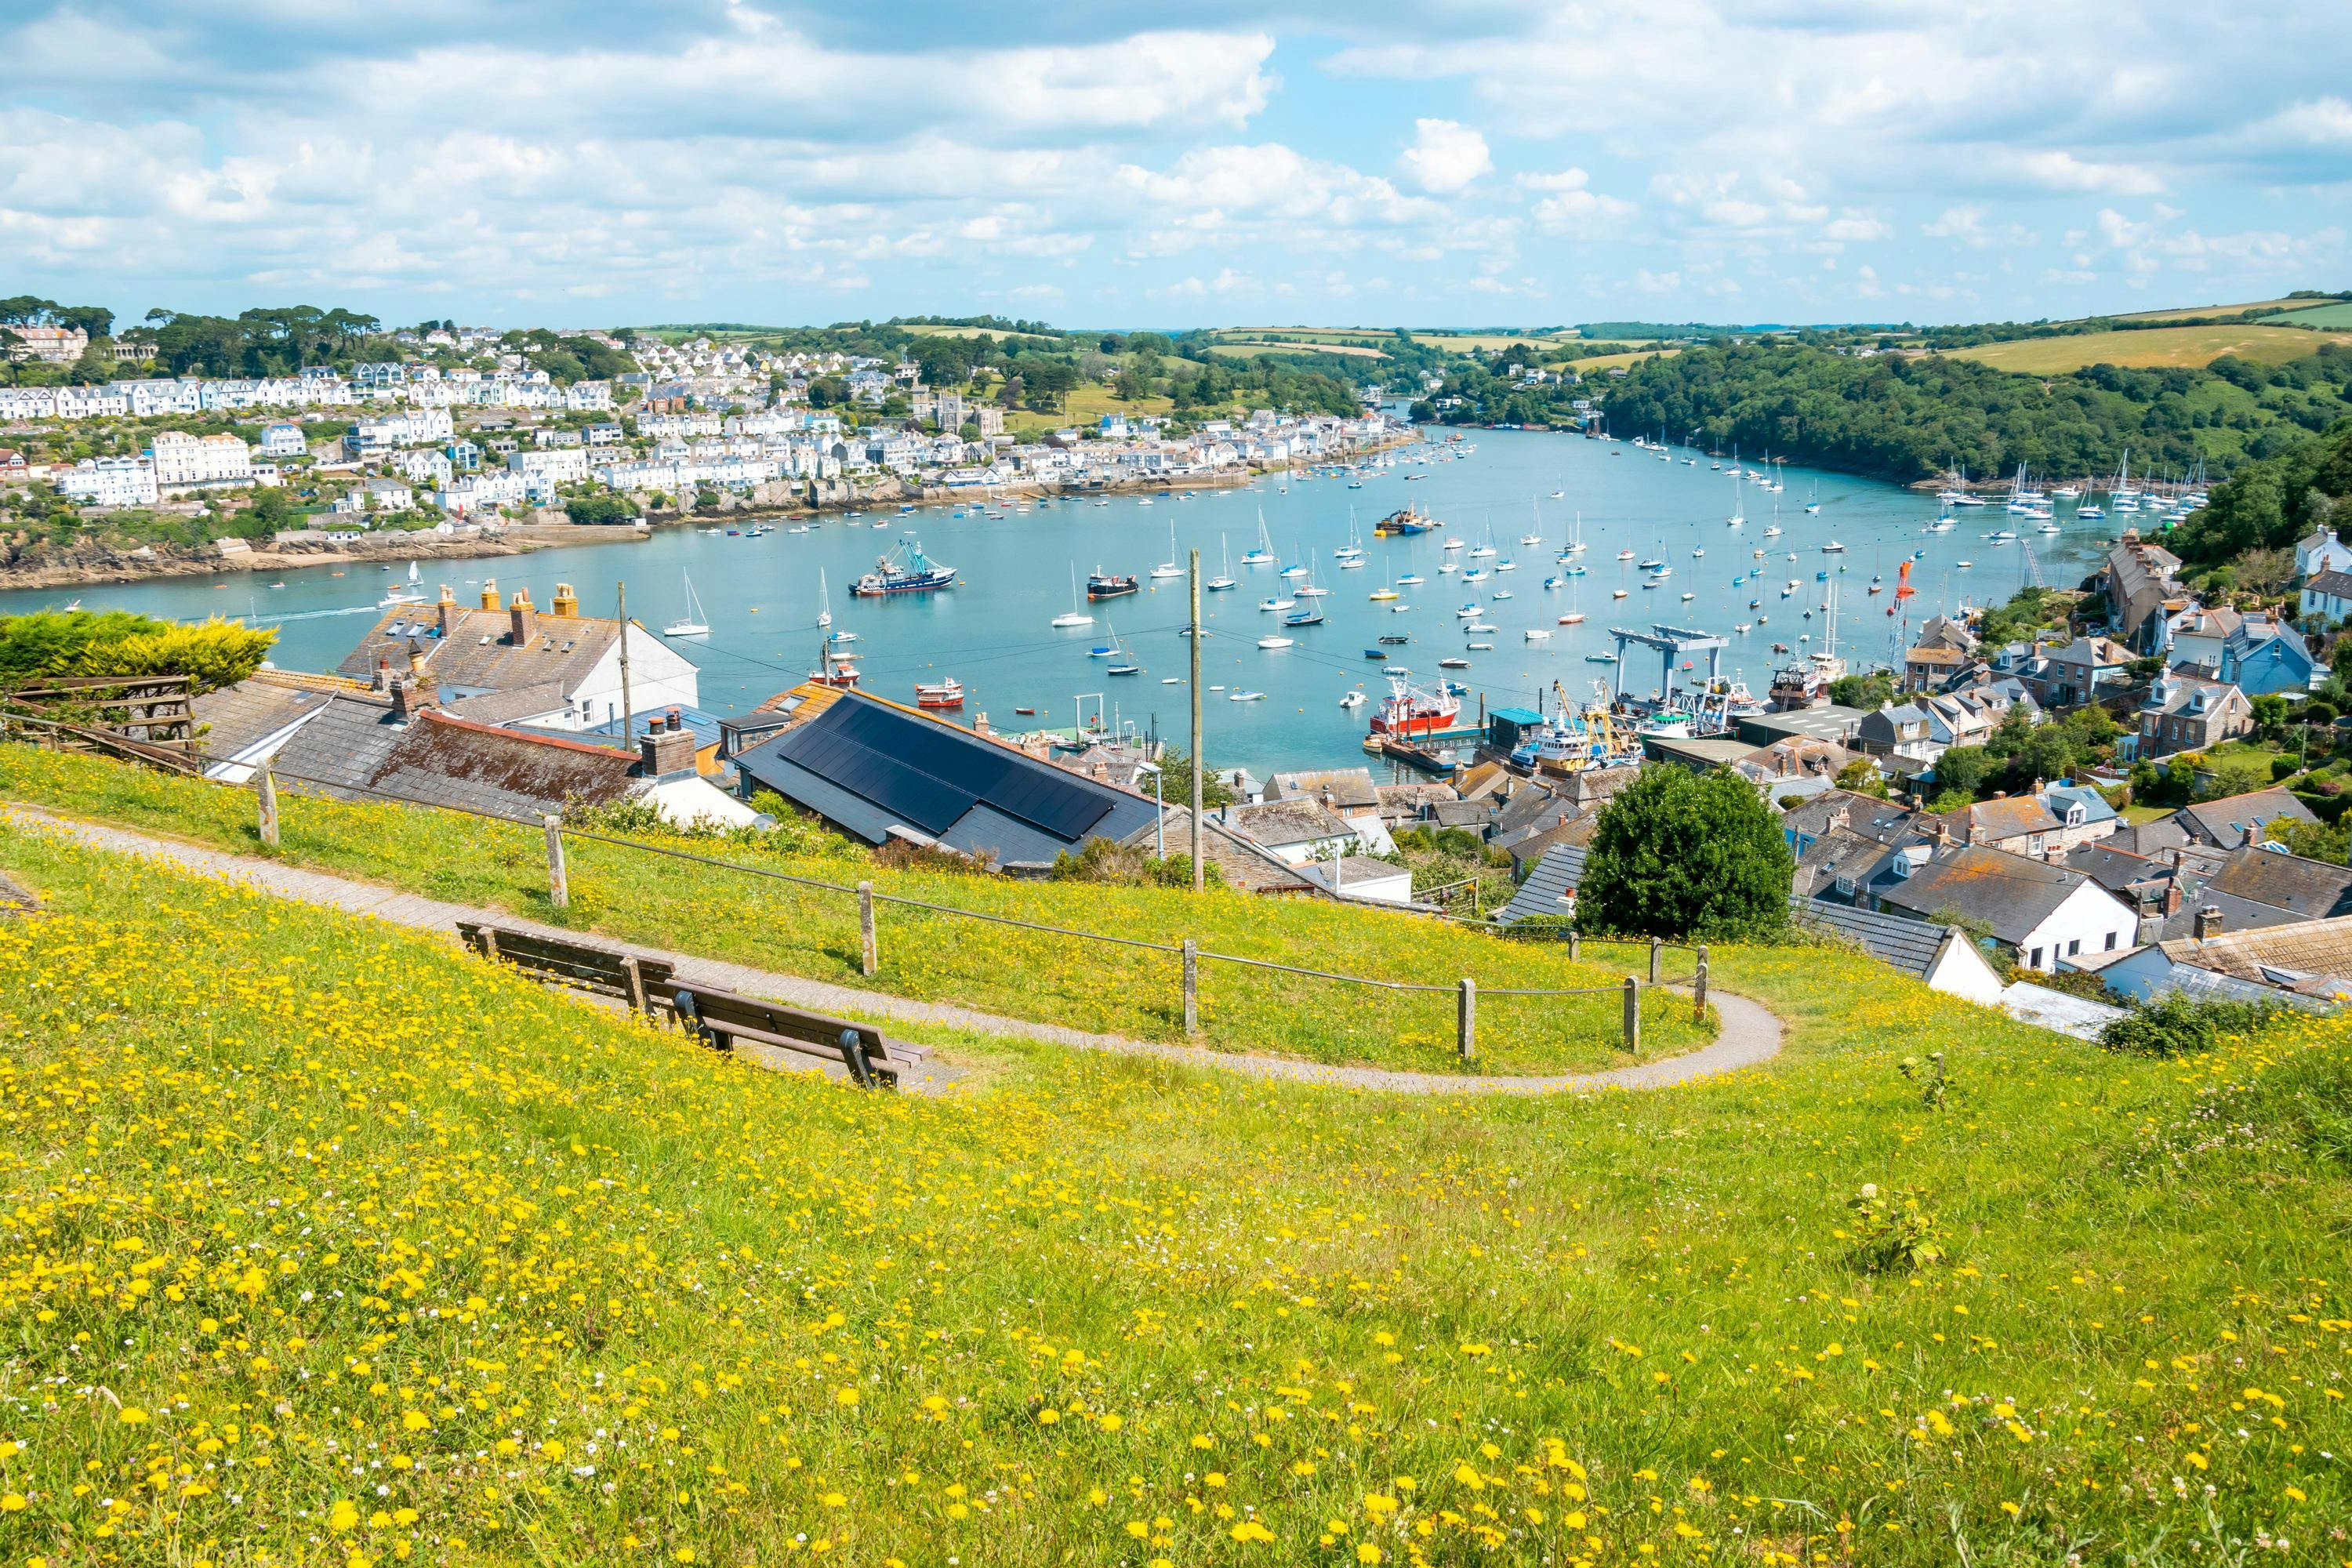 Beautiful Cornish harbour town of Fowey and Polruan, with boats moored in Fowey Estuary, Cornwall, England.